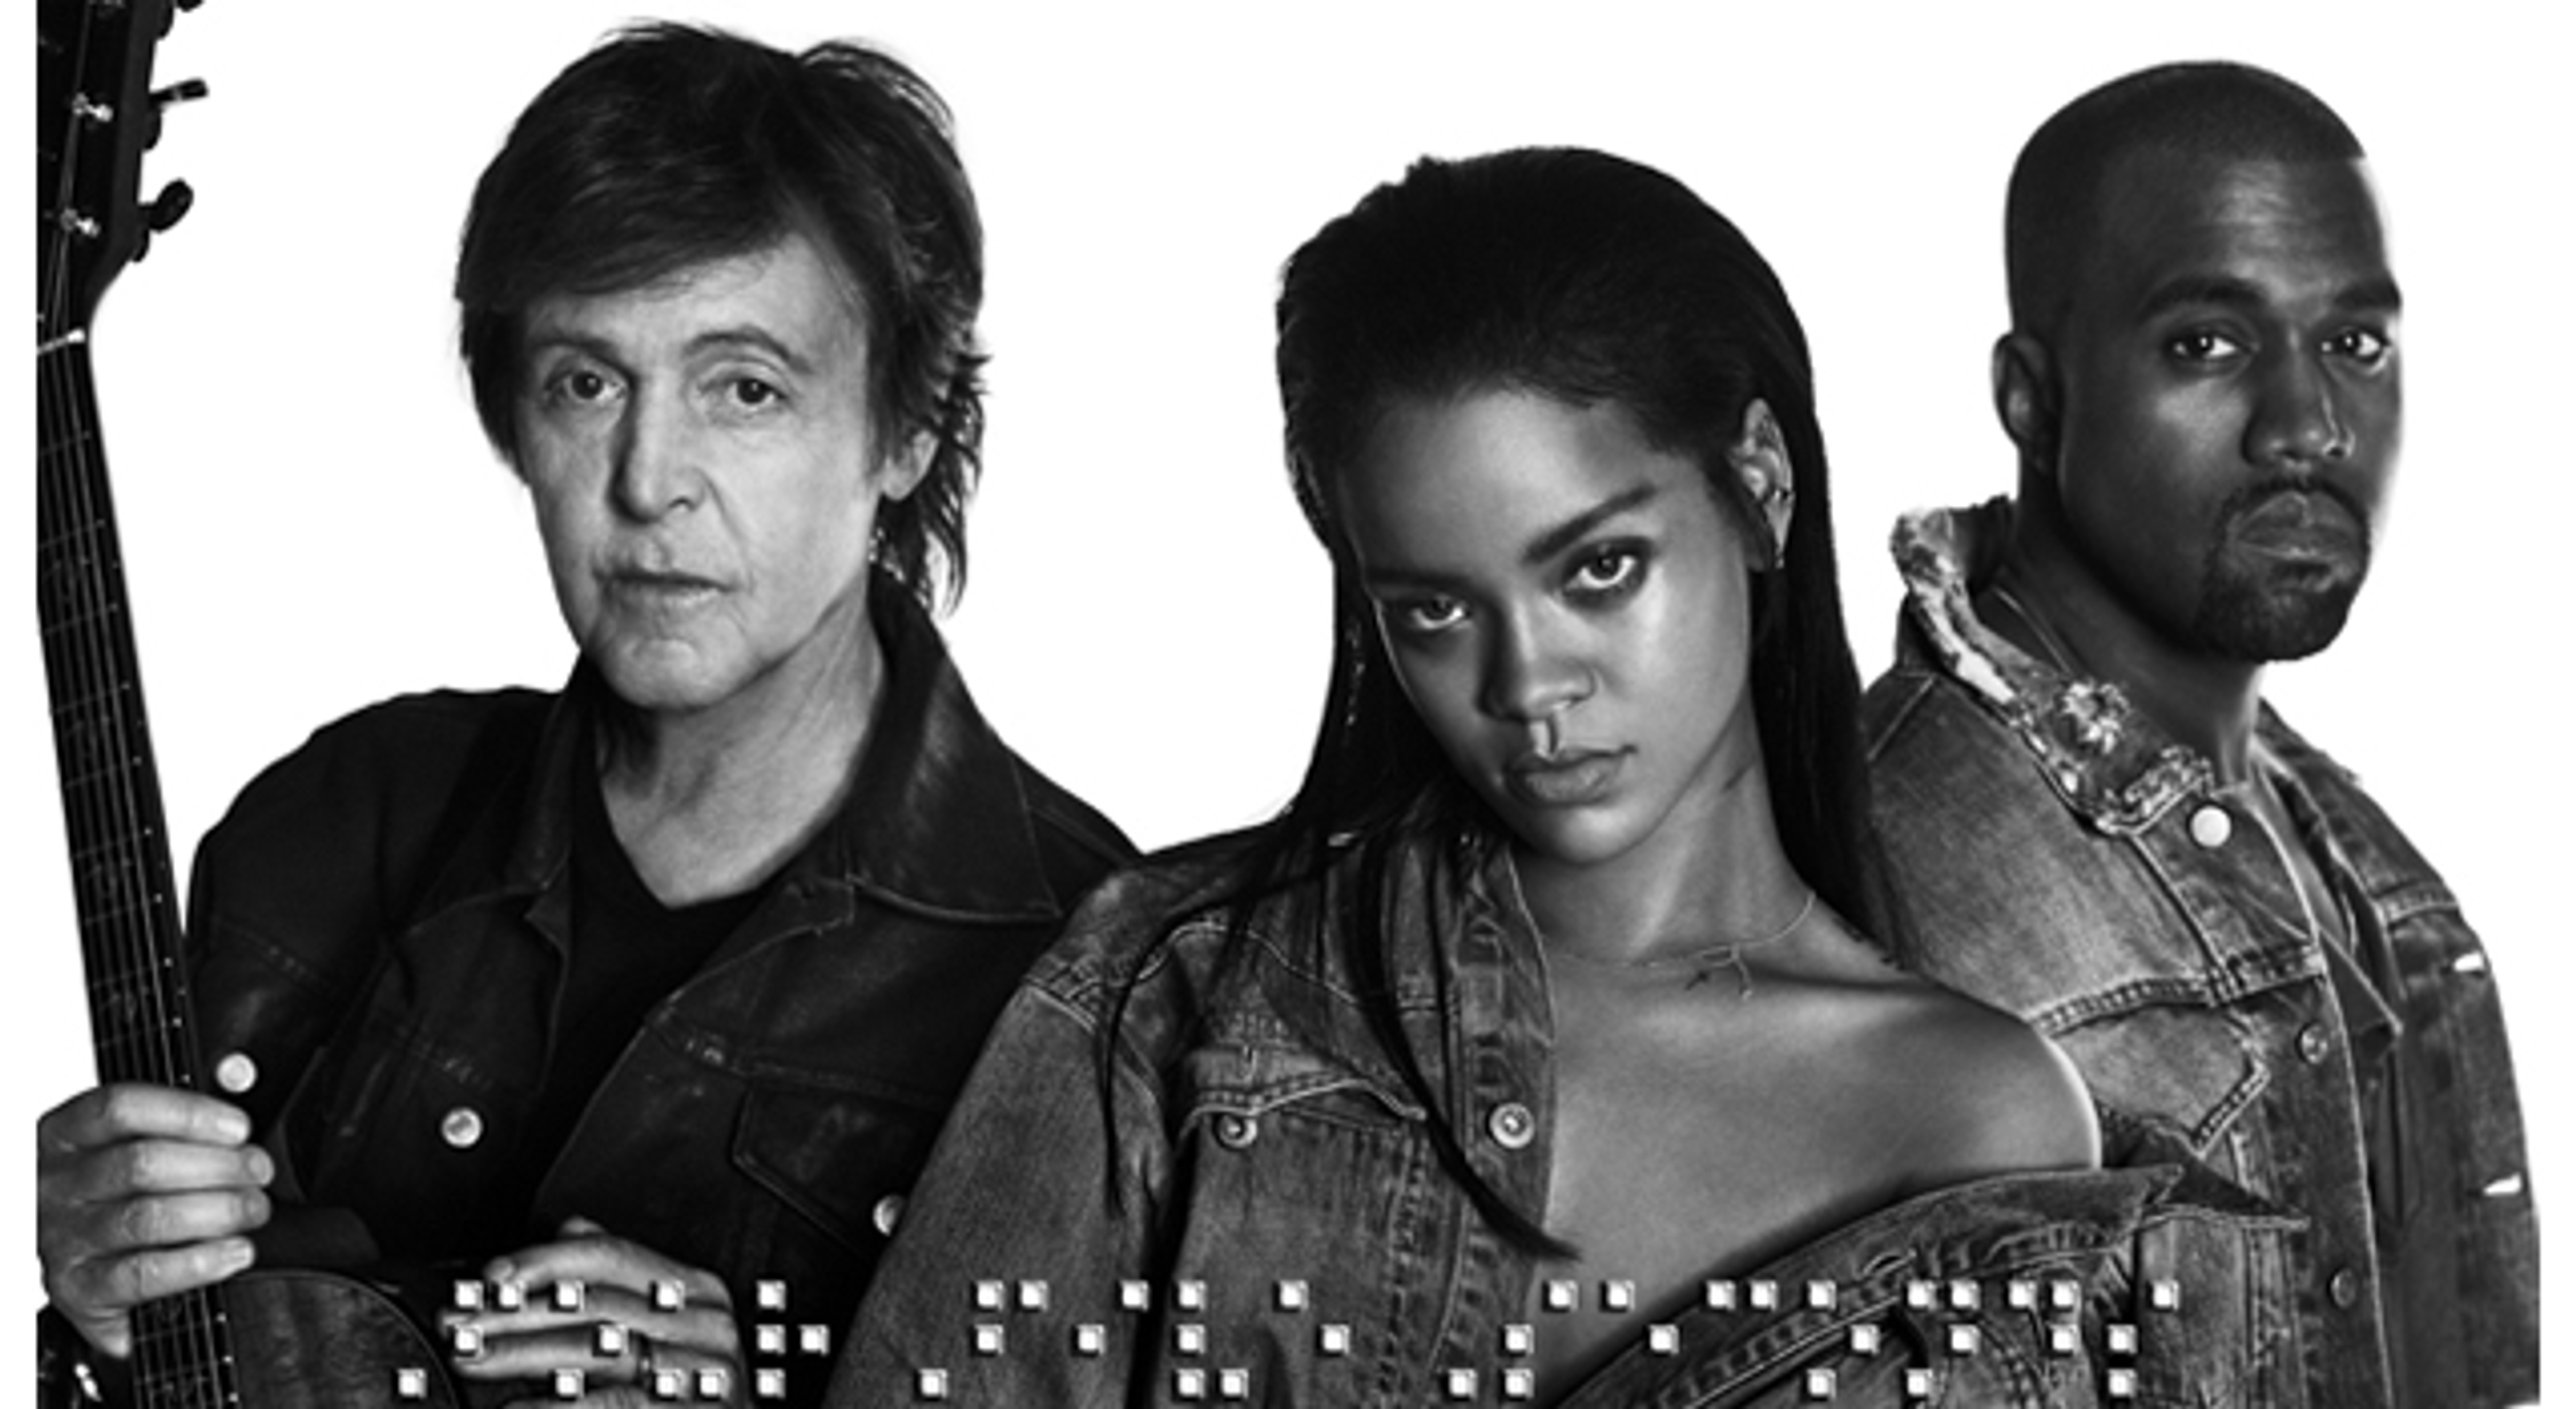 Paul Teams Up With Kanye West and Rihanna